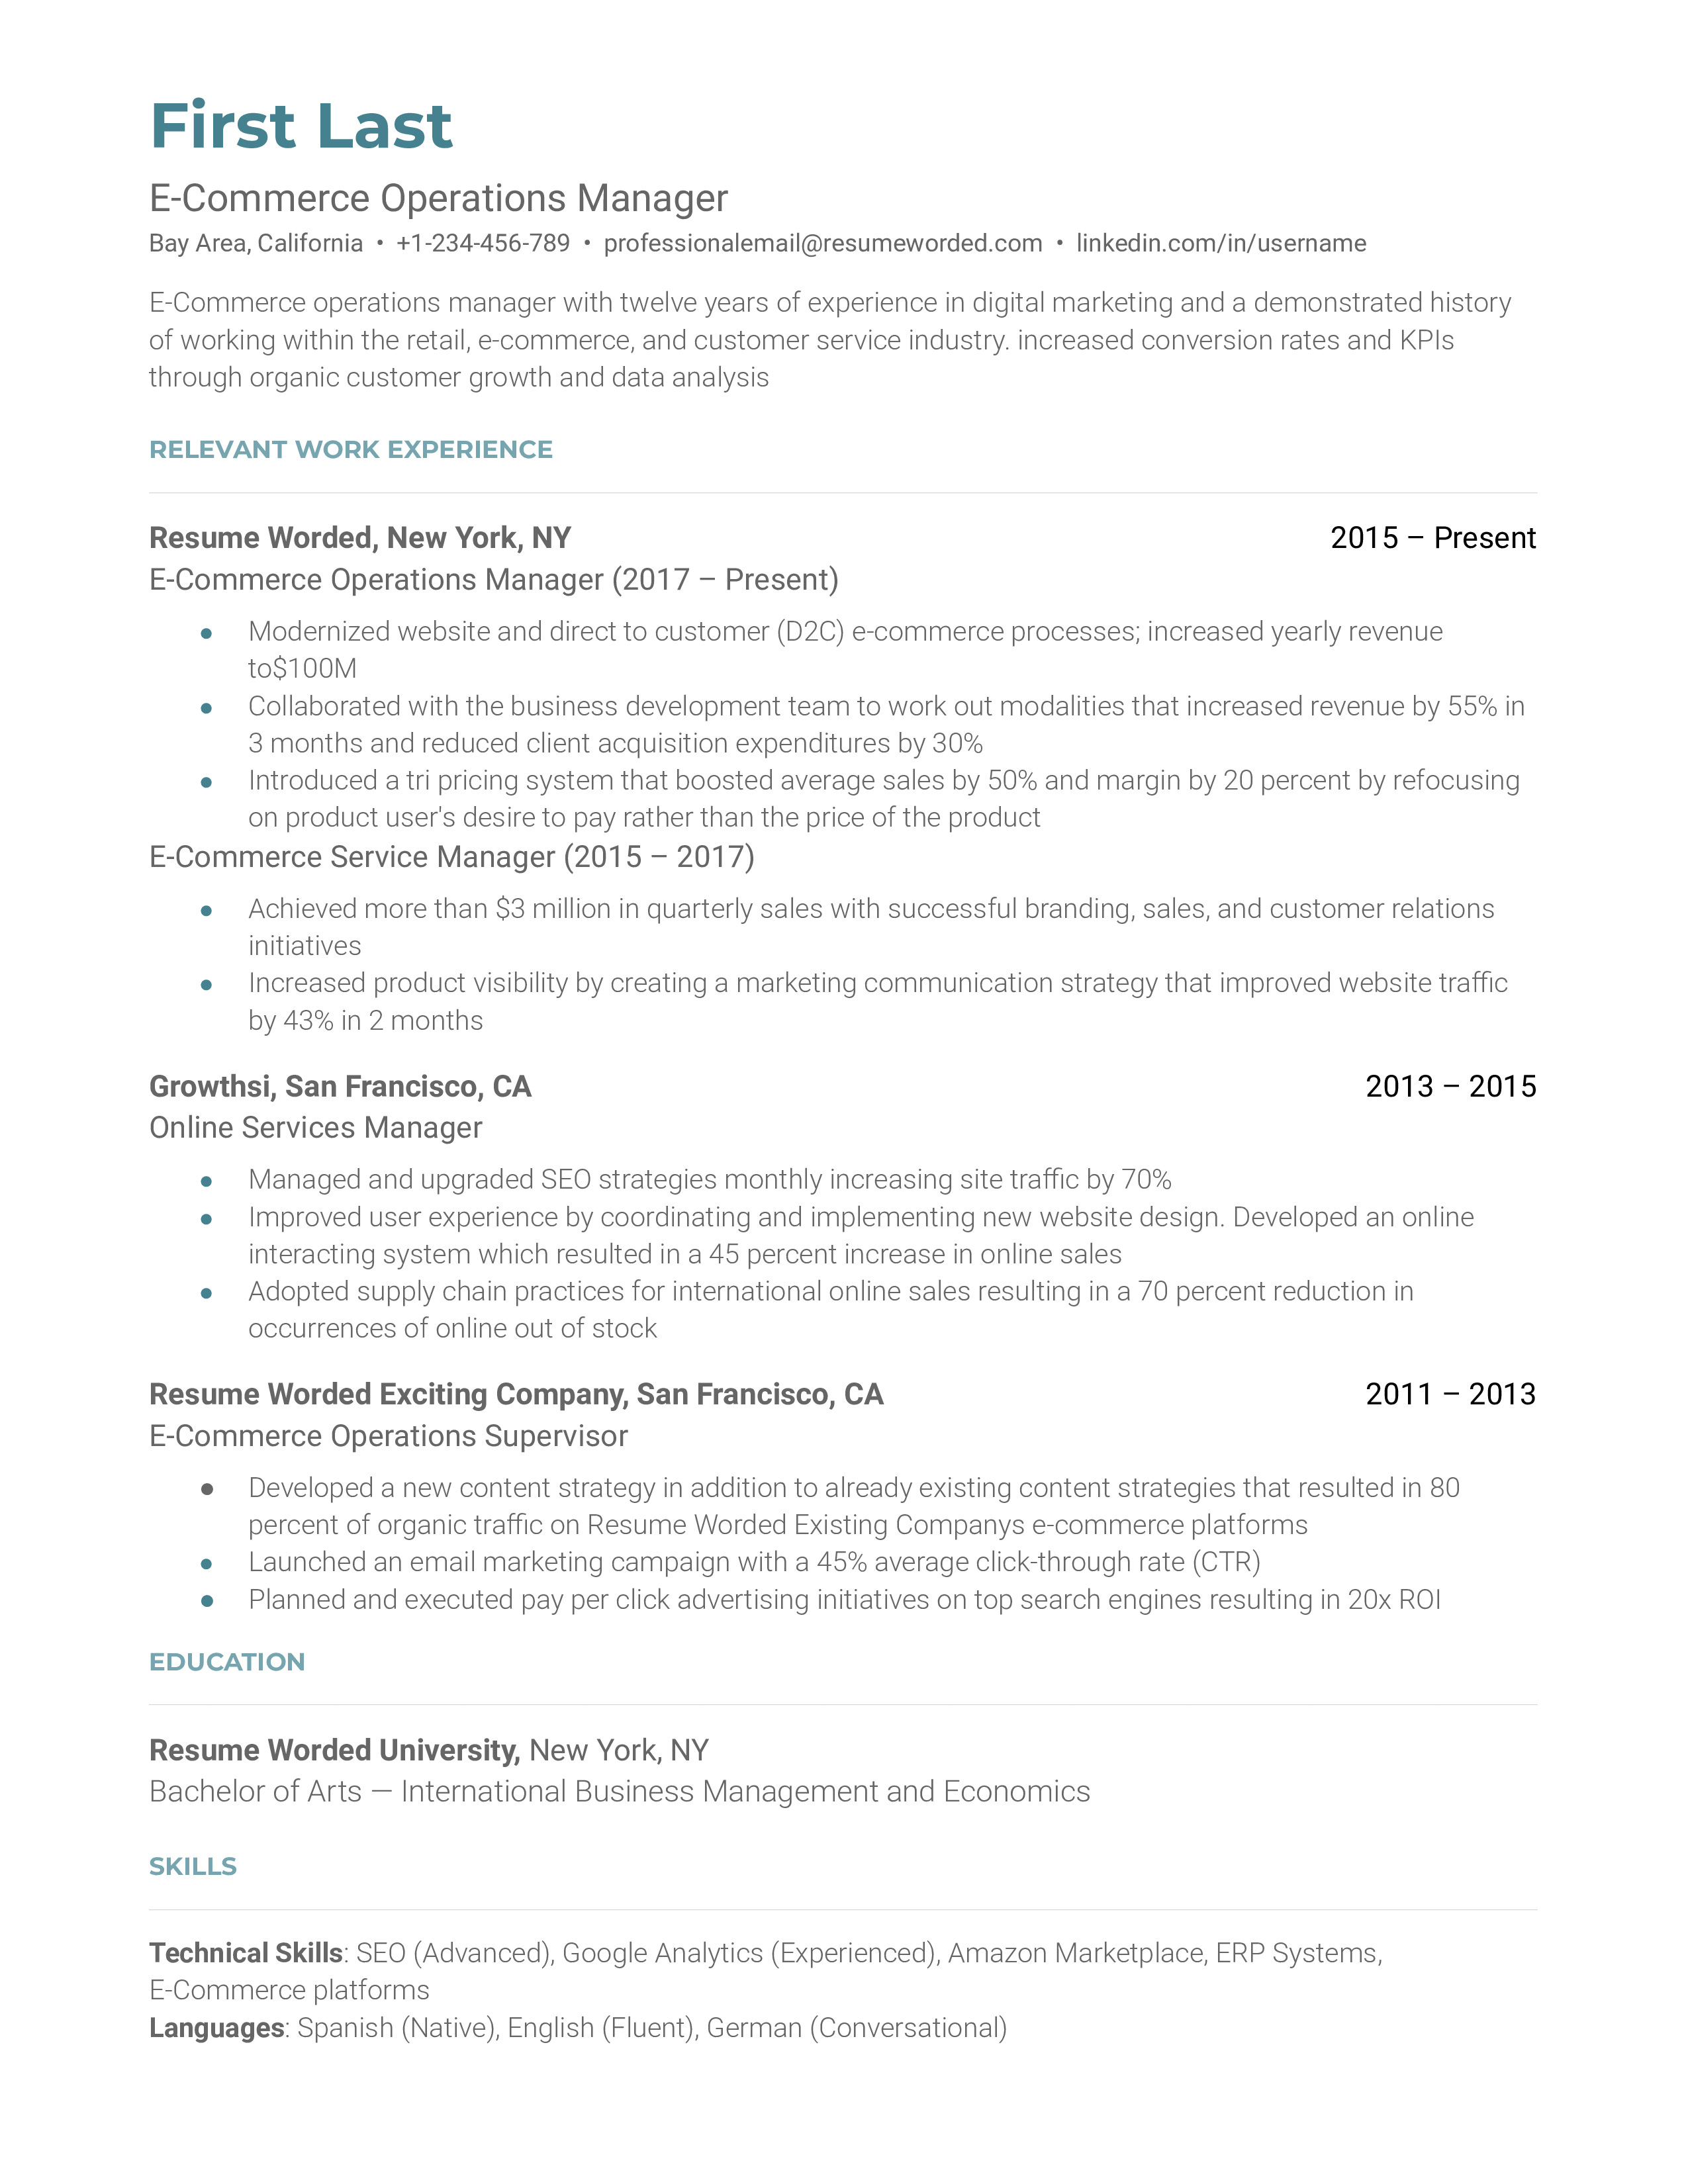 E-Commerce Operations Manager Resume Template + Example